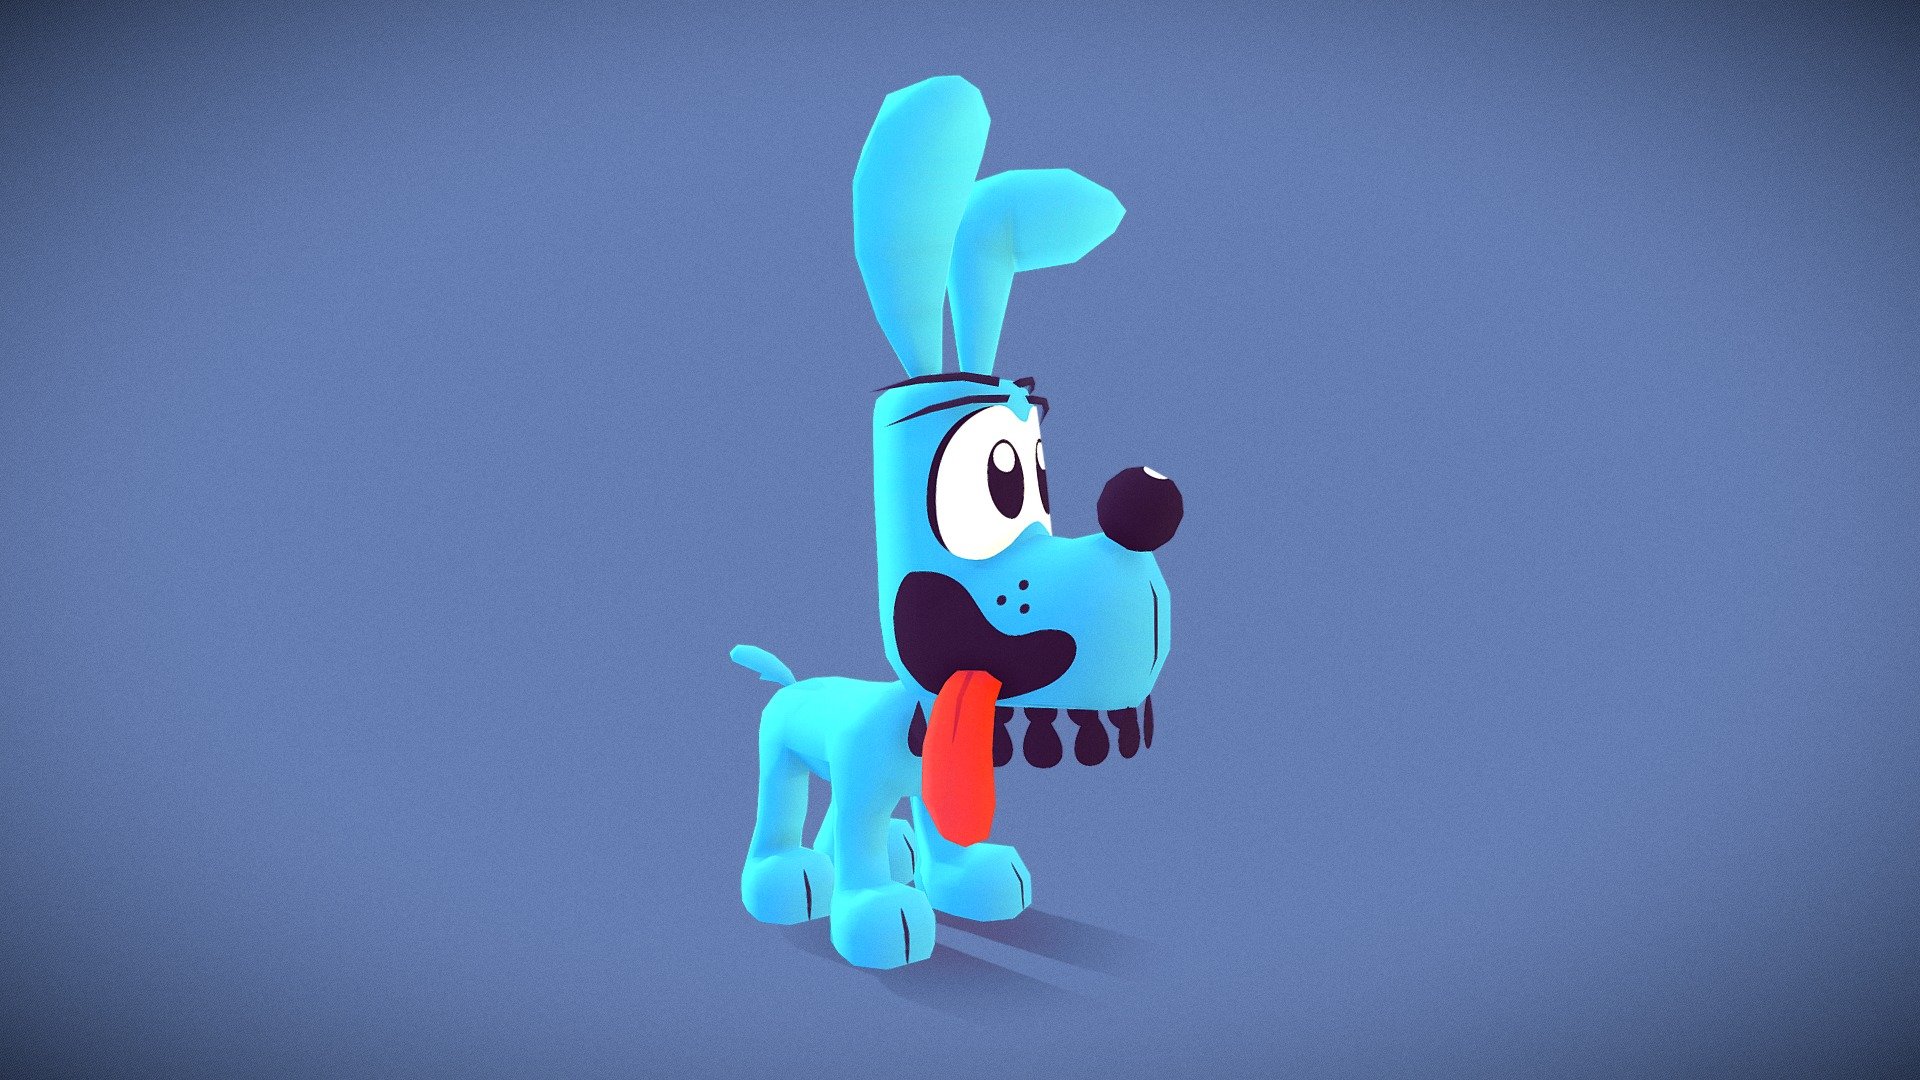 This is Bidu. Original character created by Mauricio de Sousa, a famous Brazilian cartoonist. I wanted to pay him a tribute by modeling a 3D version of his blue dog character. Here's a picture of it so you can know his original art style.

 - Bidu - 3D model by Igor Lemon (@igorlemon) 3d model